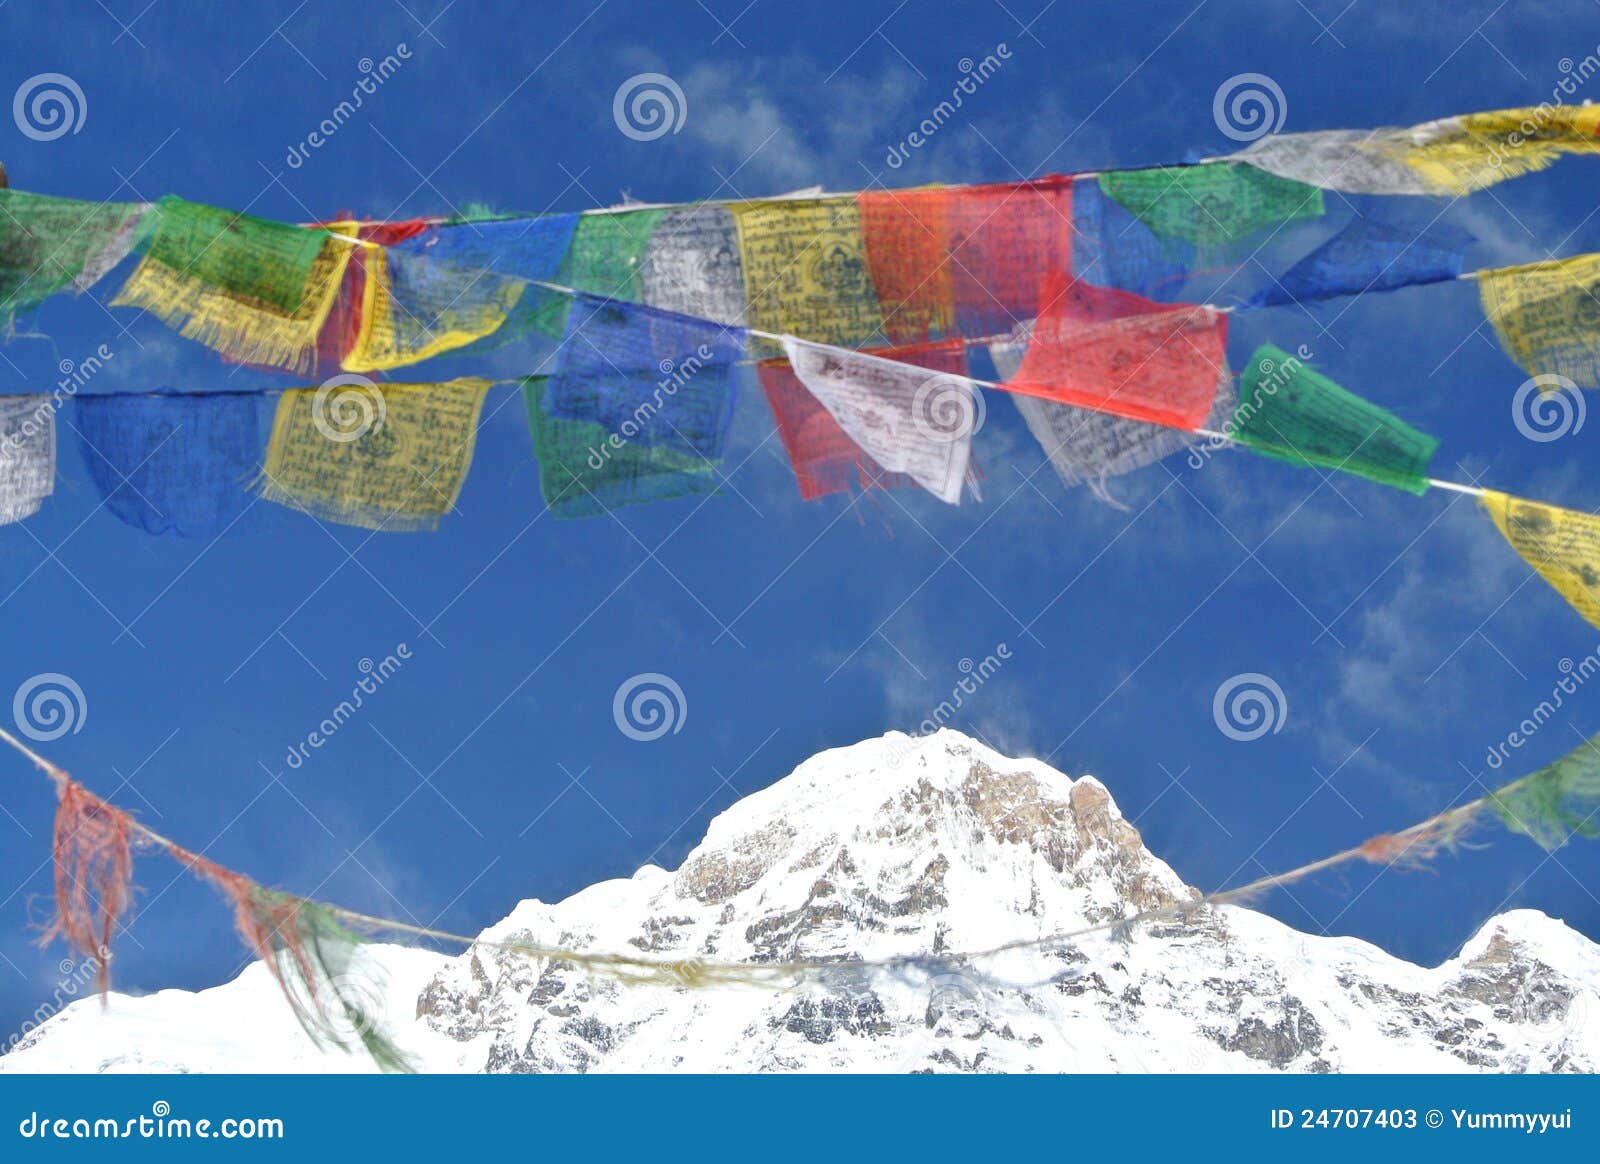 Prayer flags with a snow mountains